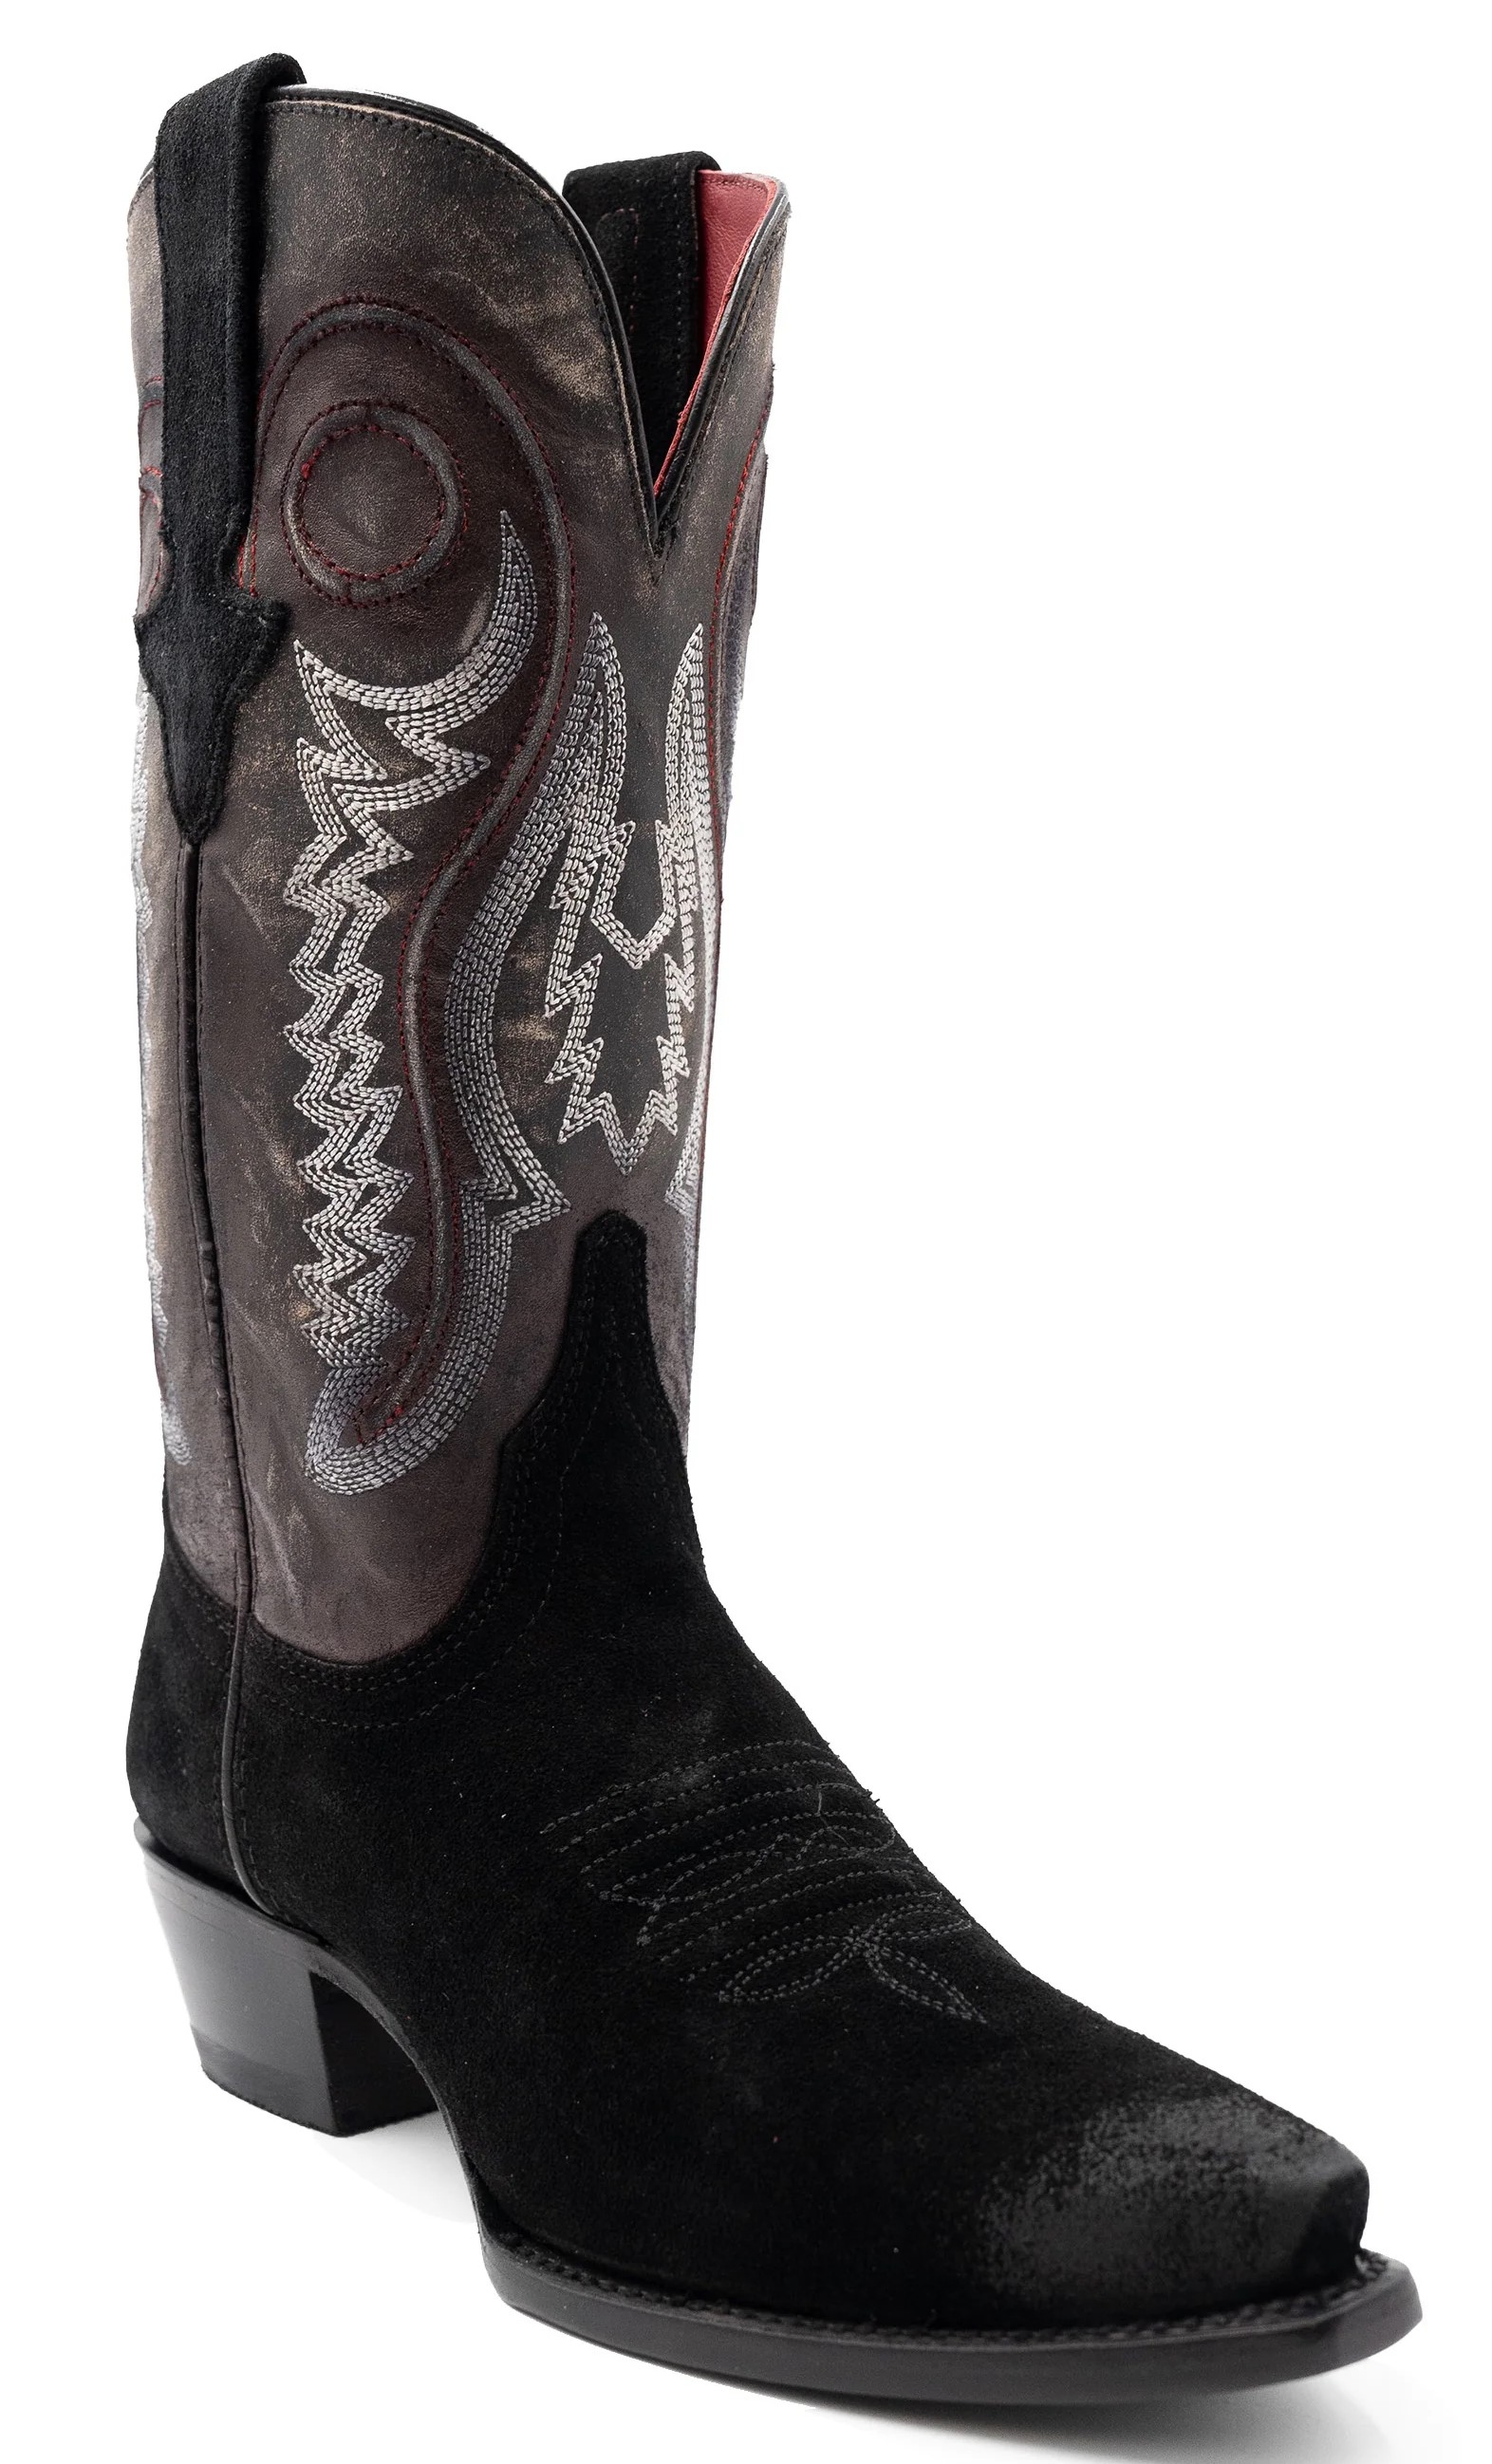 Ferrini Ladies "Roughrider" Black Full Grain Leather Snipped Toe Cowgirl Boots 84361-04